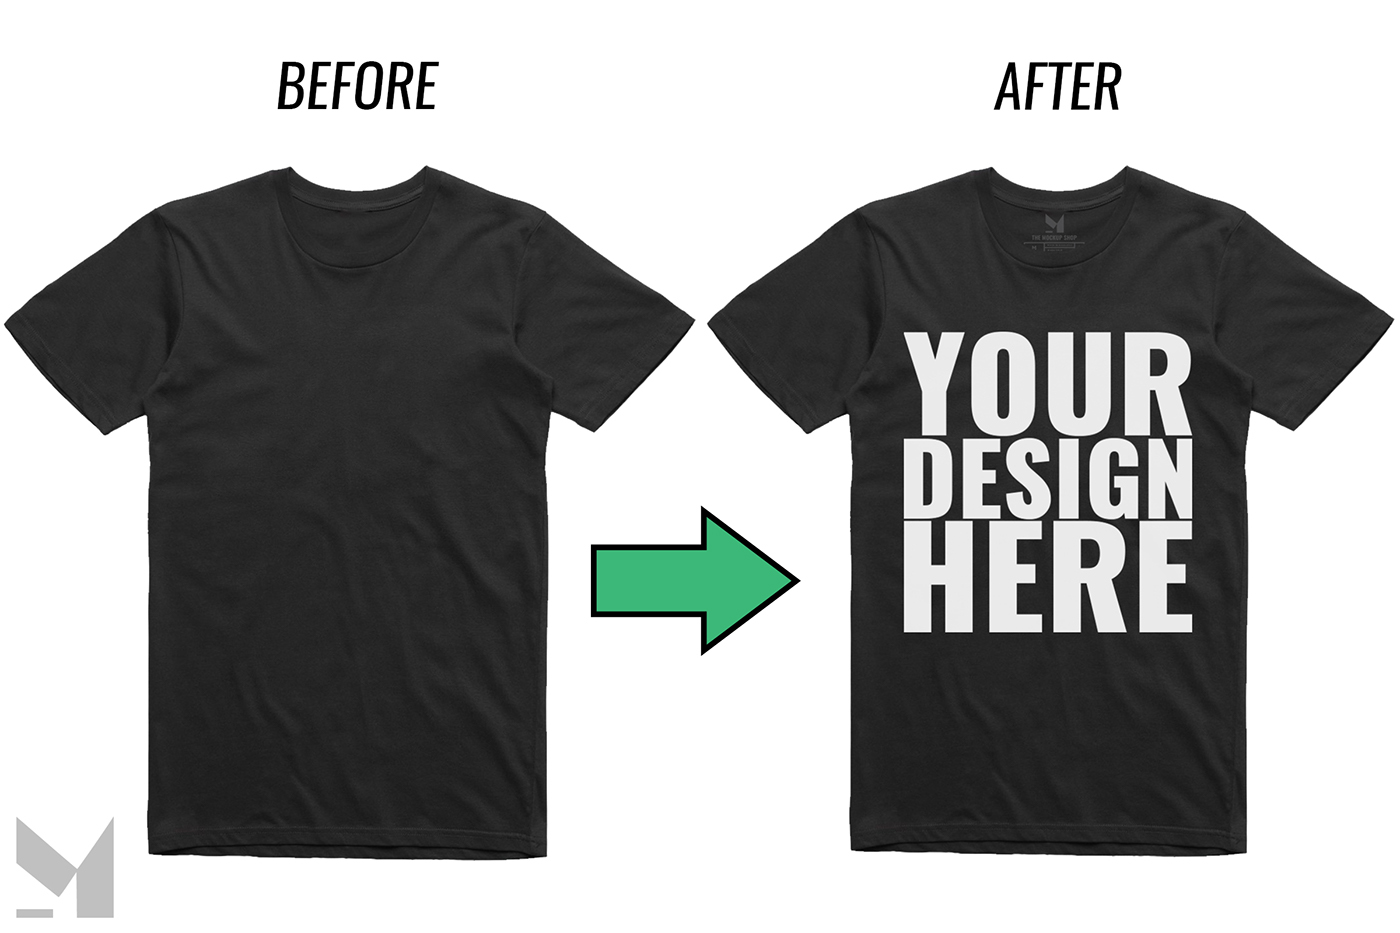 Weight t shirt mockup black free 10 Design your own t shirt app 